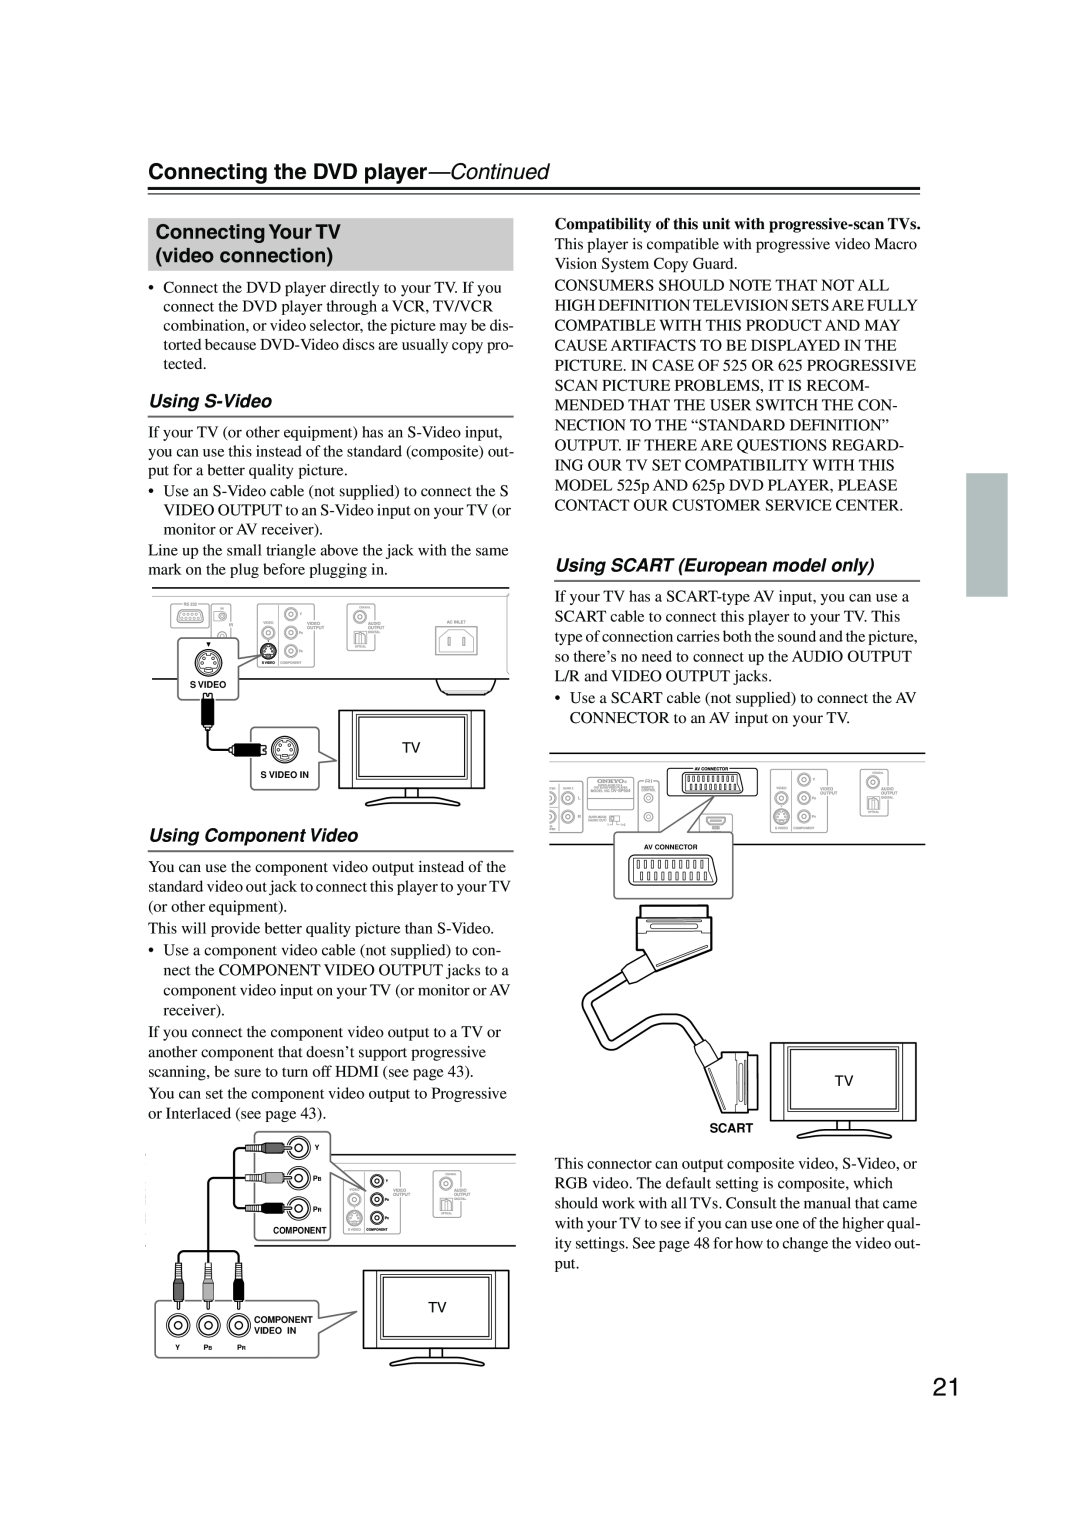 Onkyo DV-SP504E instruction manual Connecting Your TV video connection, Connecting the DVD player-Continued, Using S-Video 